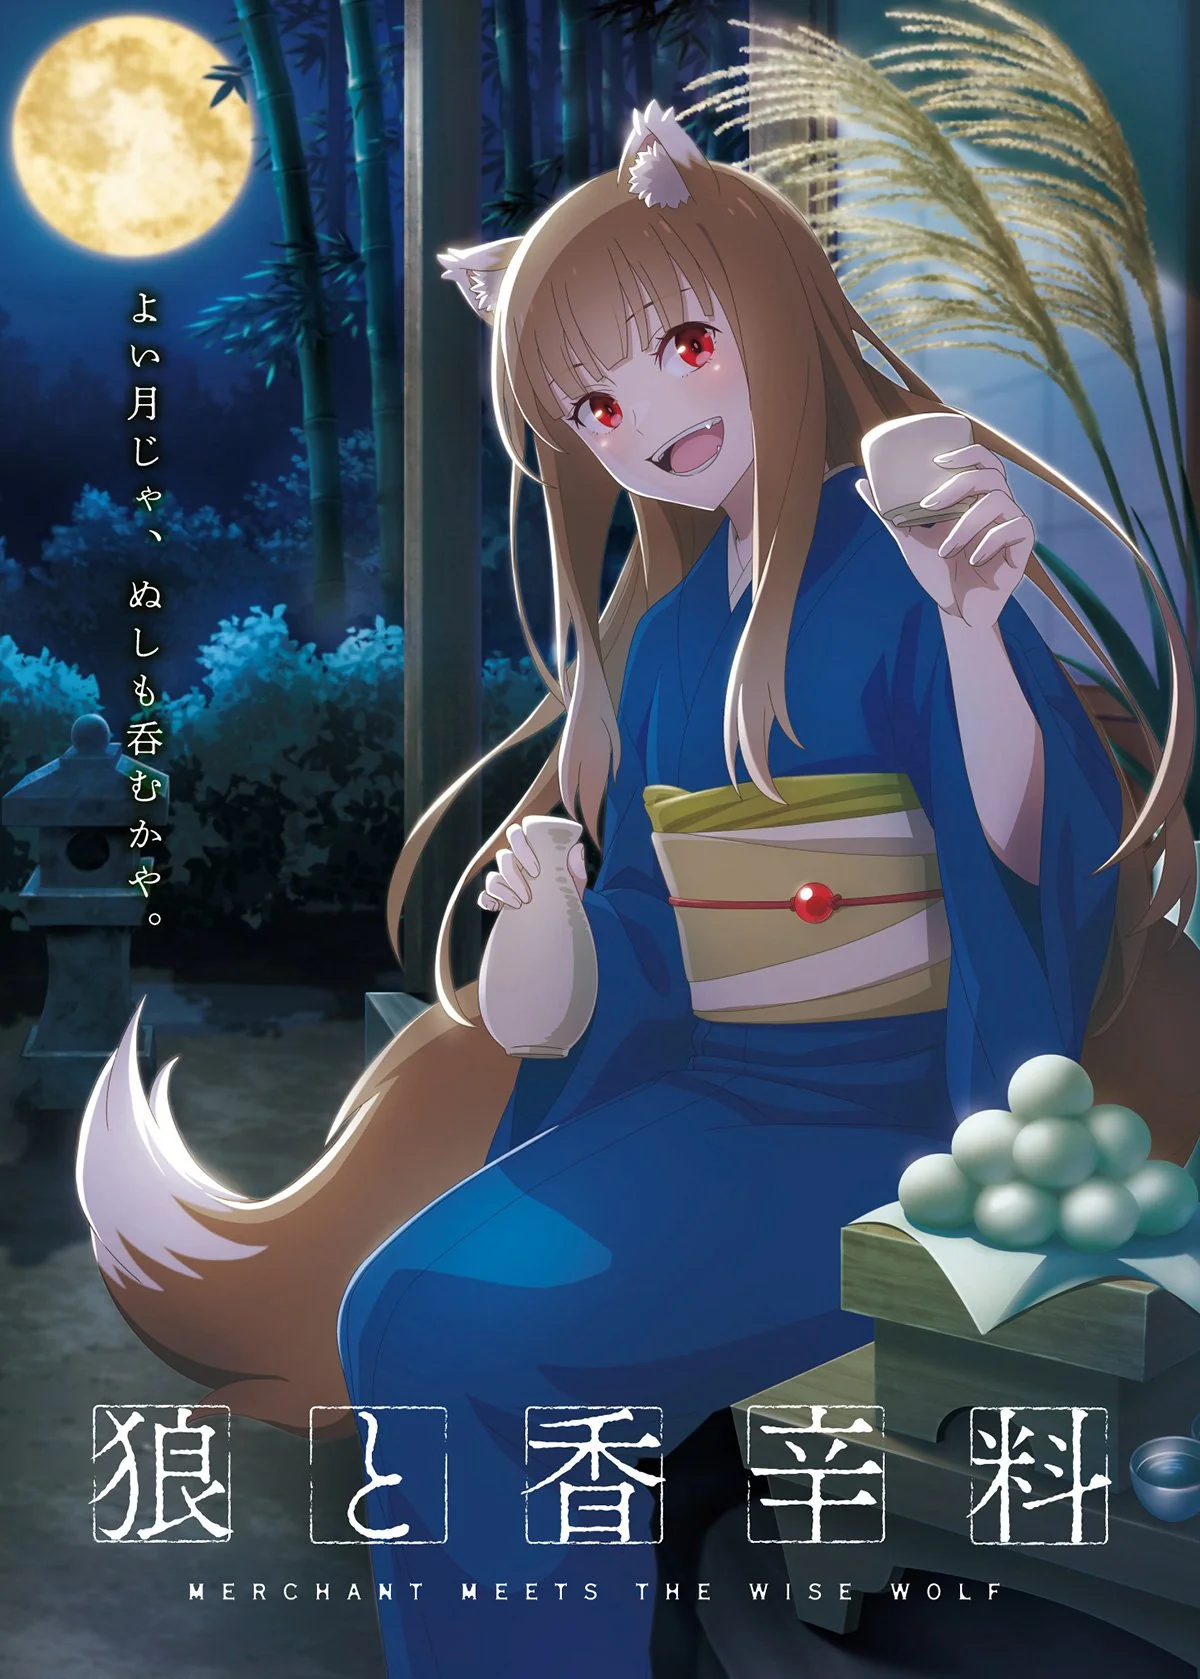 Spice and Wolf: Merchant Meets the Wise Wolf English Subbed